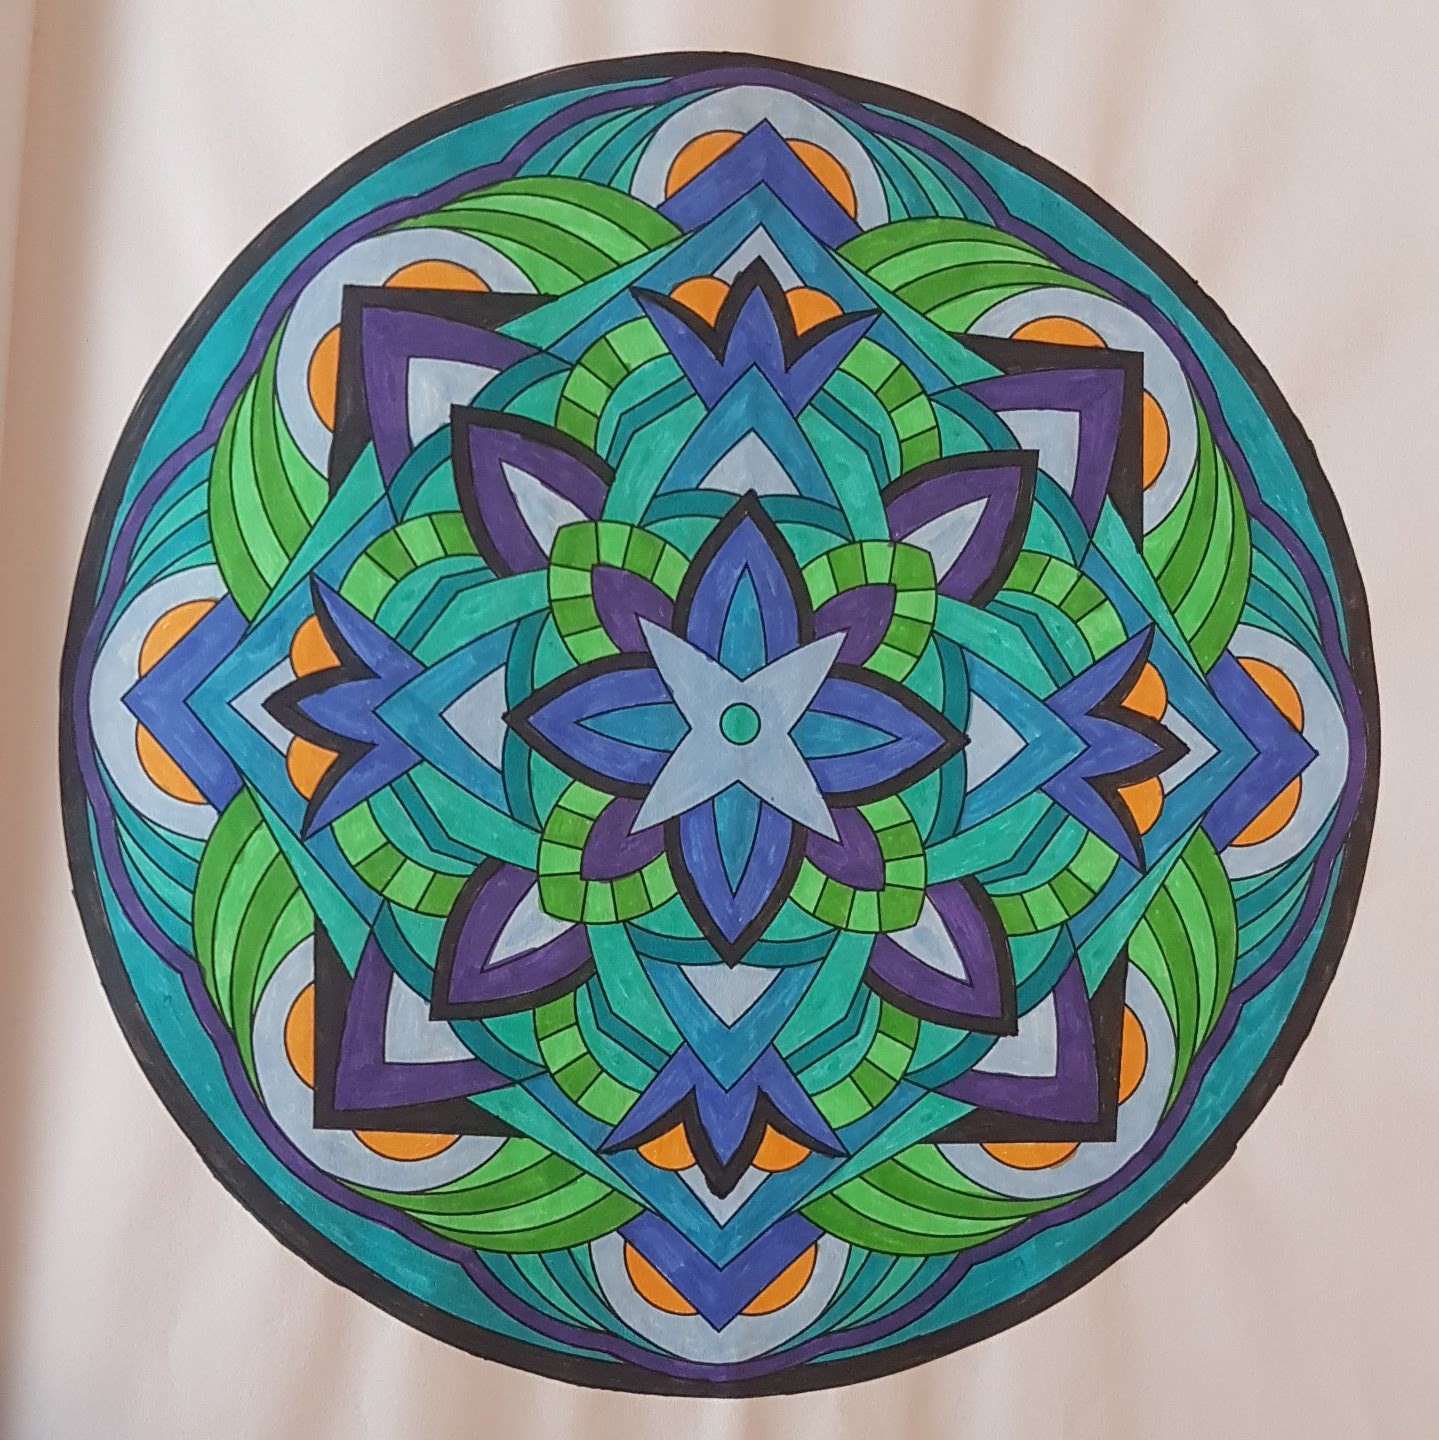 A mandala starting with blue 4 pointed star shapes in the middle, with purple-pointed leaf shapes around that, and some semi circlular shapes in green